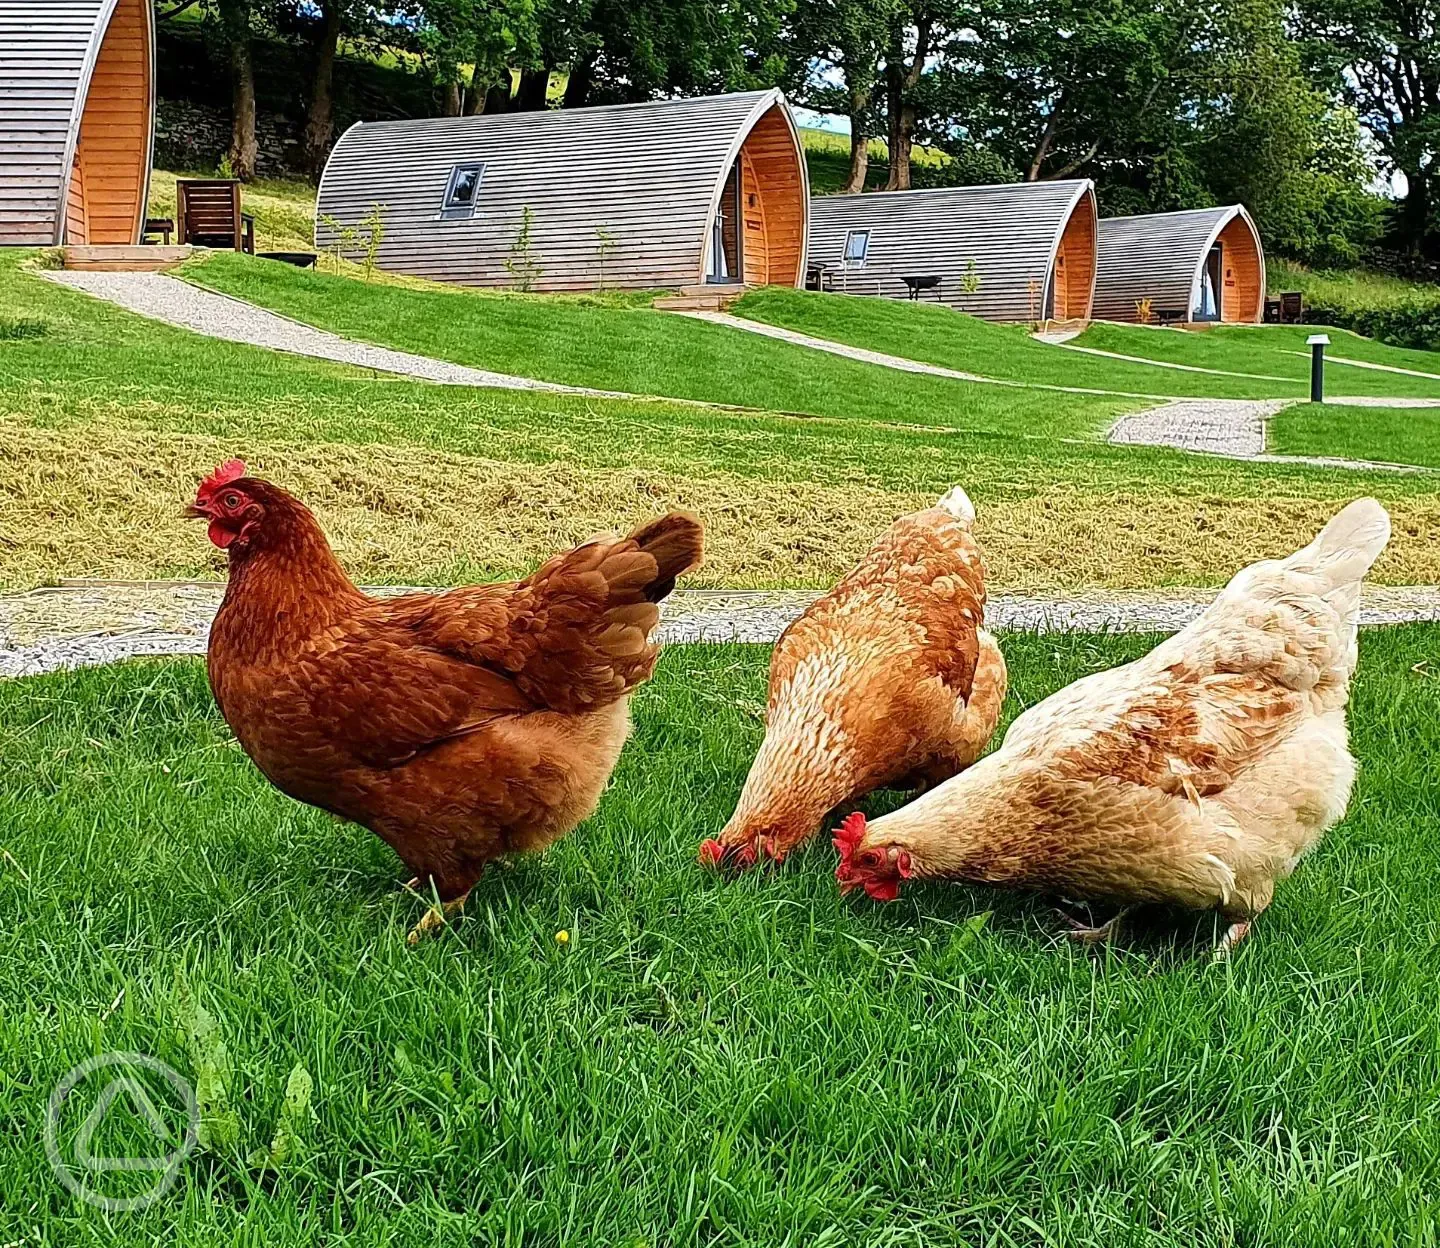 Chickens on site